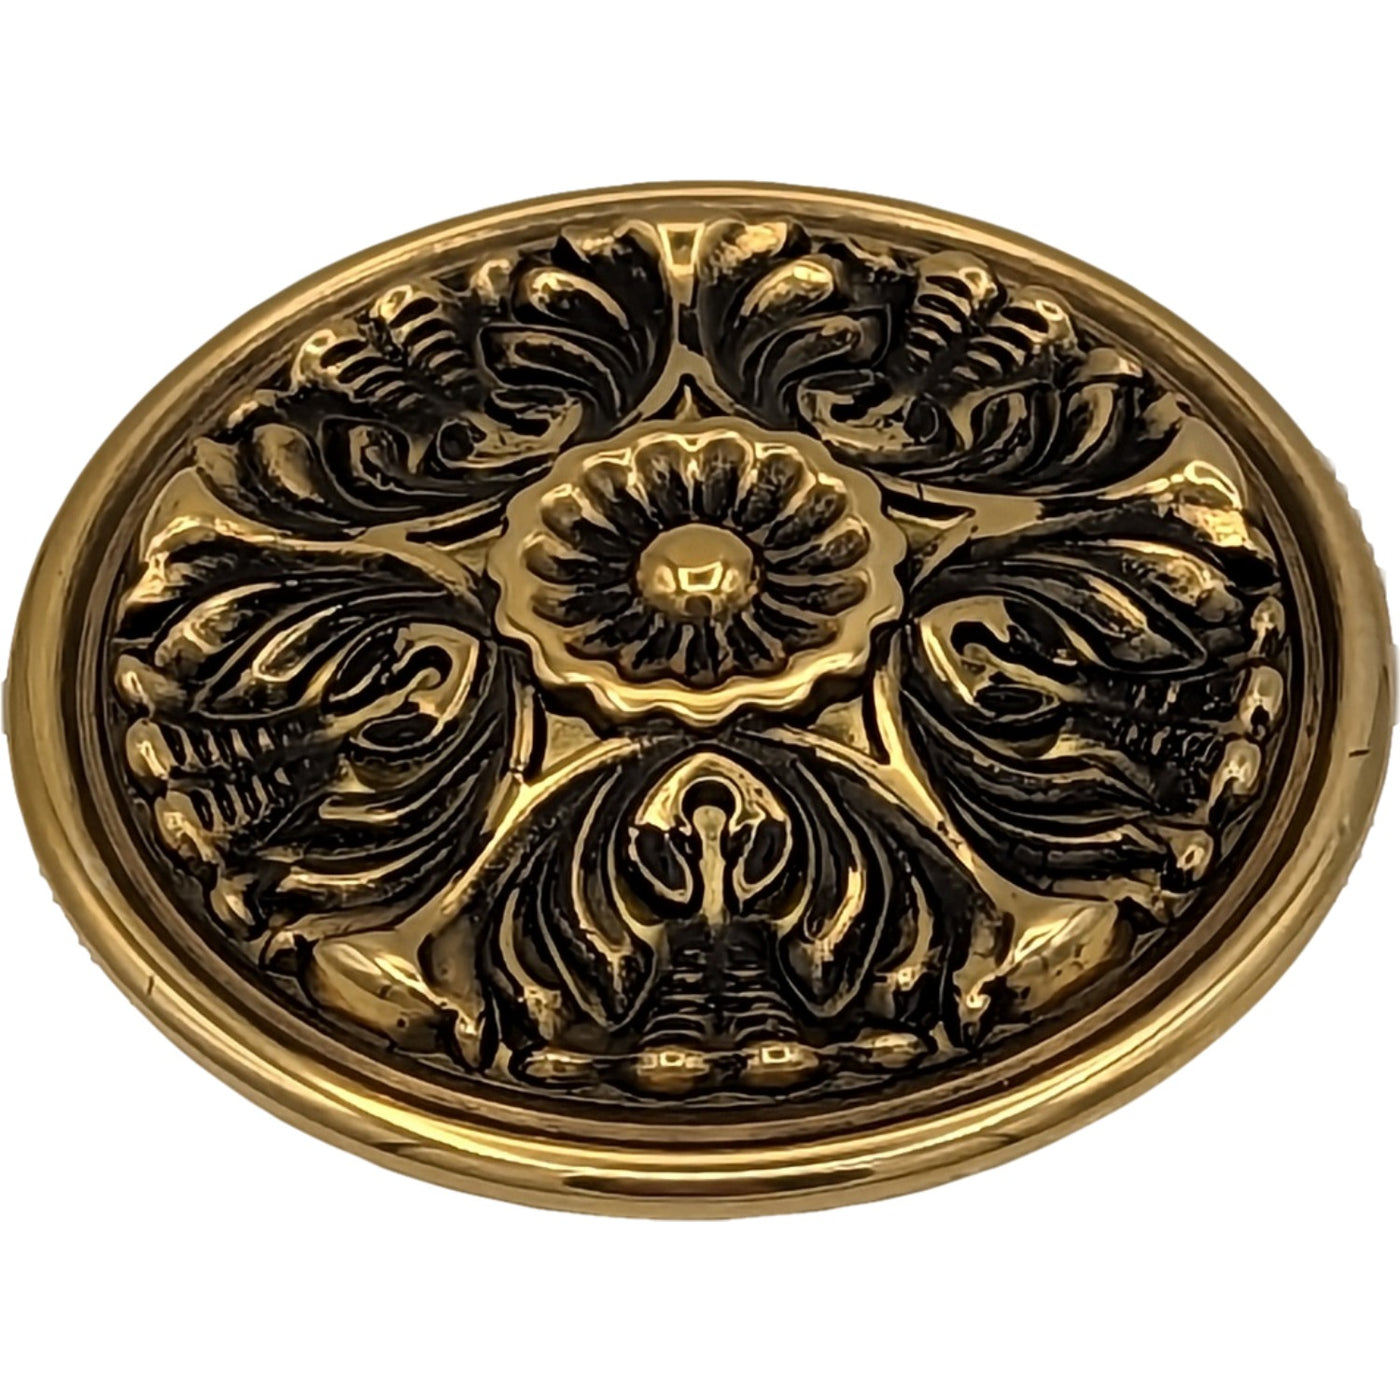 2 Inch Solid Brass Victorian Floral Cabinet & Furniture Knob (Several Finishes Available)